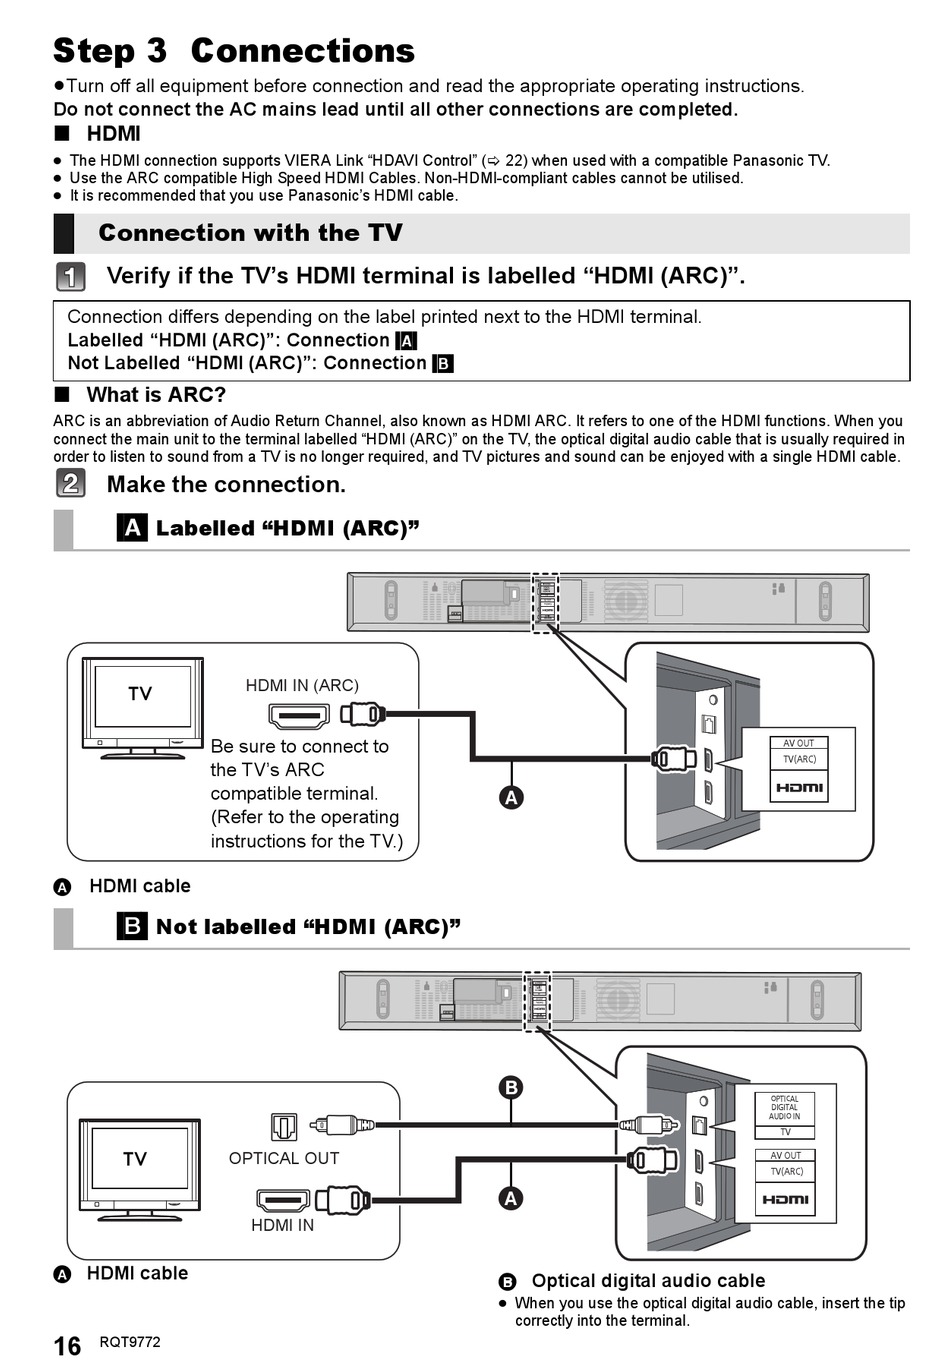 Step 3 Connections; Connection With The Tv - Panasonic SC-HTB170 